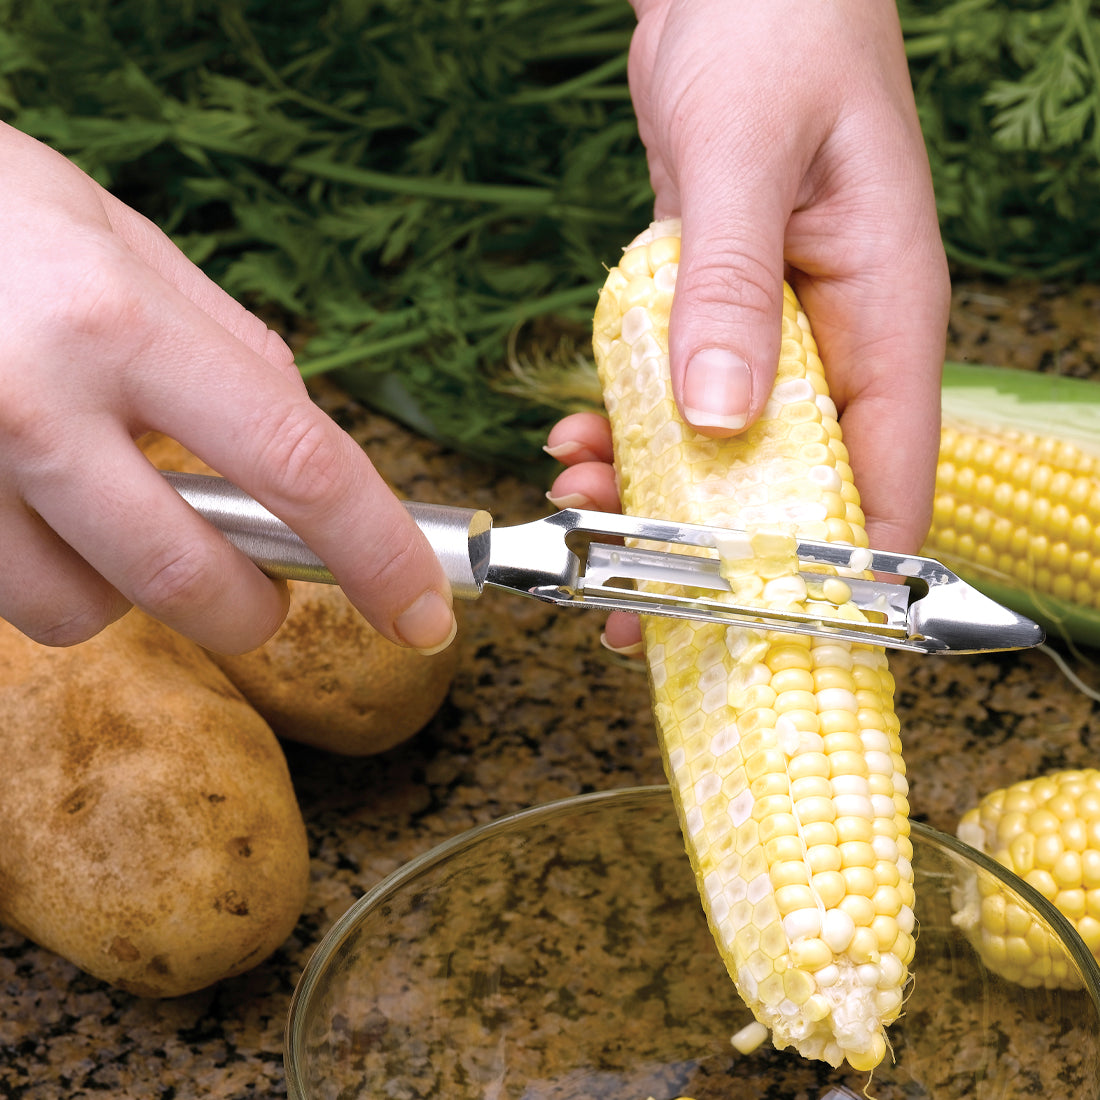 RADA Vegetable Peeler Blade Stainless Steel Resin, Made in the USA, 7-1/4  Inches, Pack of 2